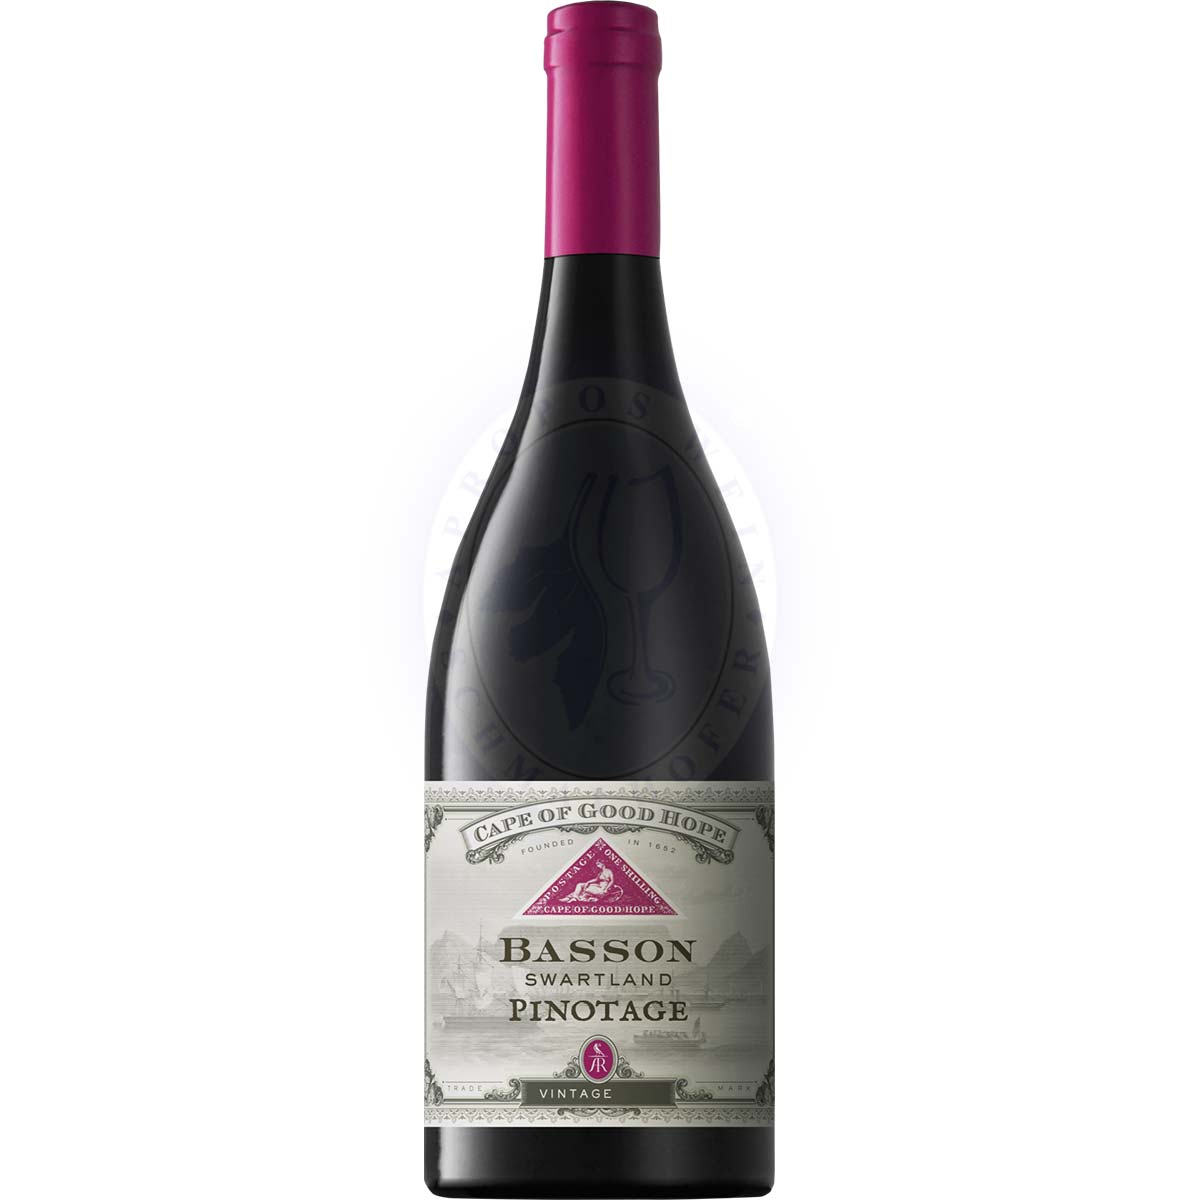 Cape of Good Hope Basson Pinotage 2018 0,75l